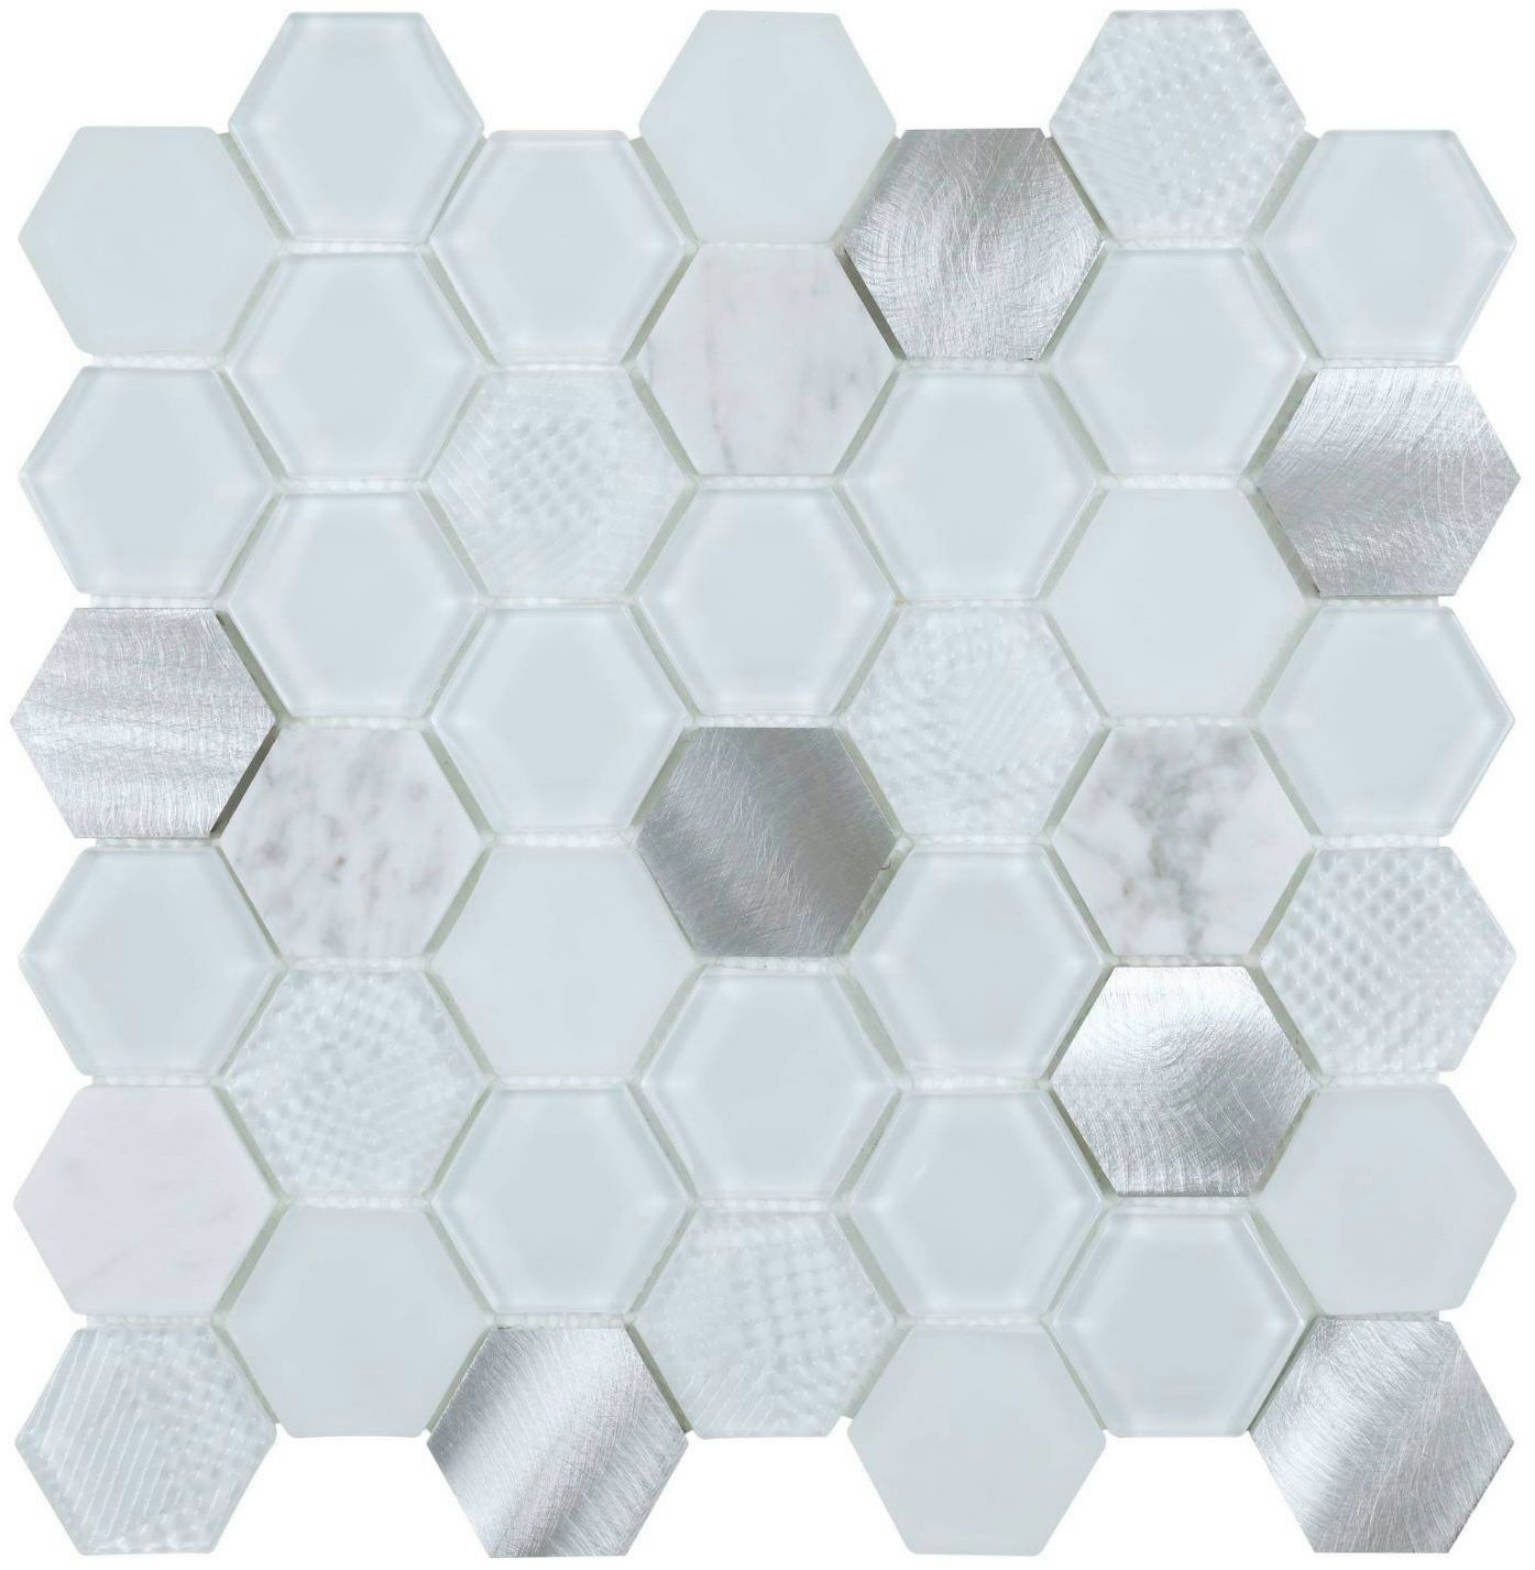 HX-198 | Stones & More | Finest selection of Mosaics, Glass, Tile and Stone